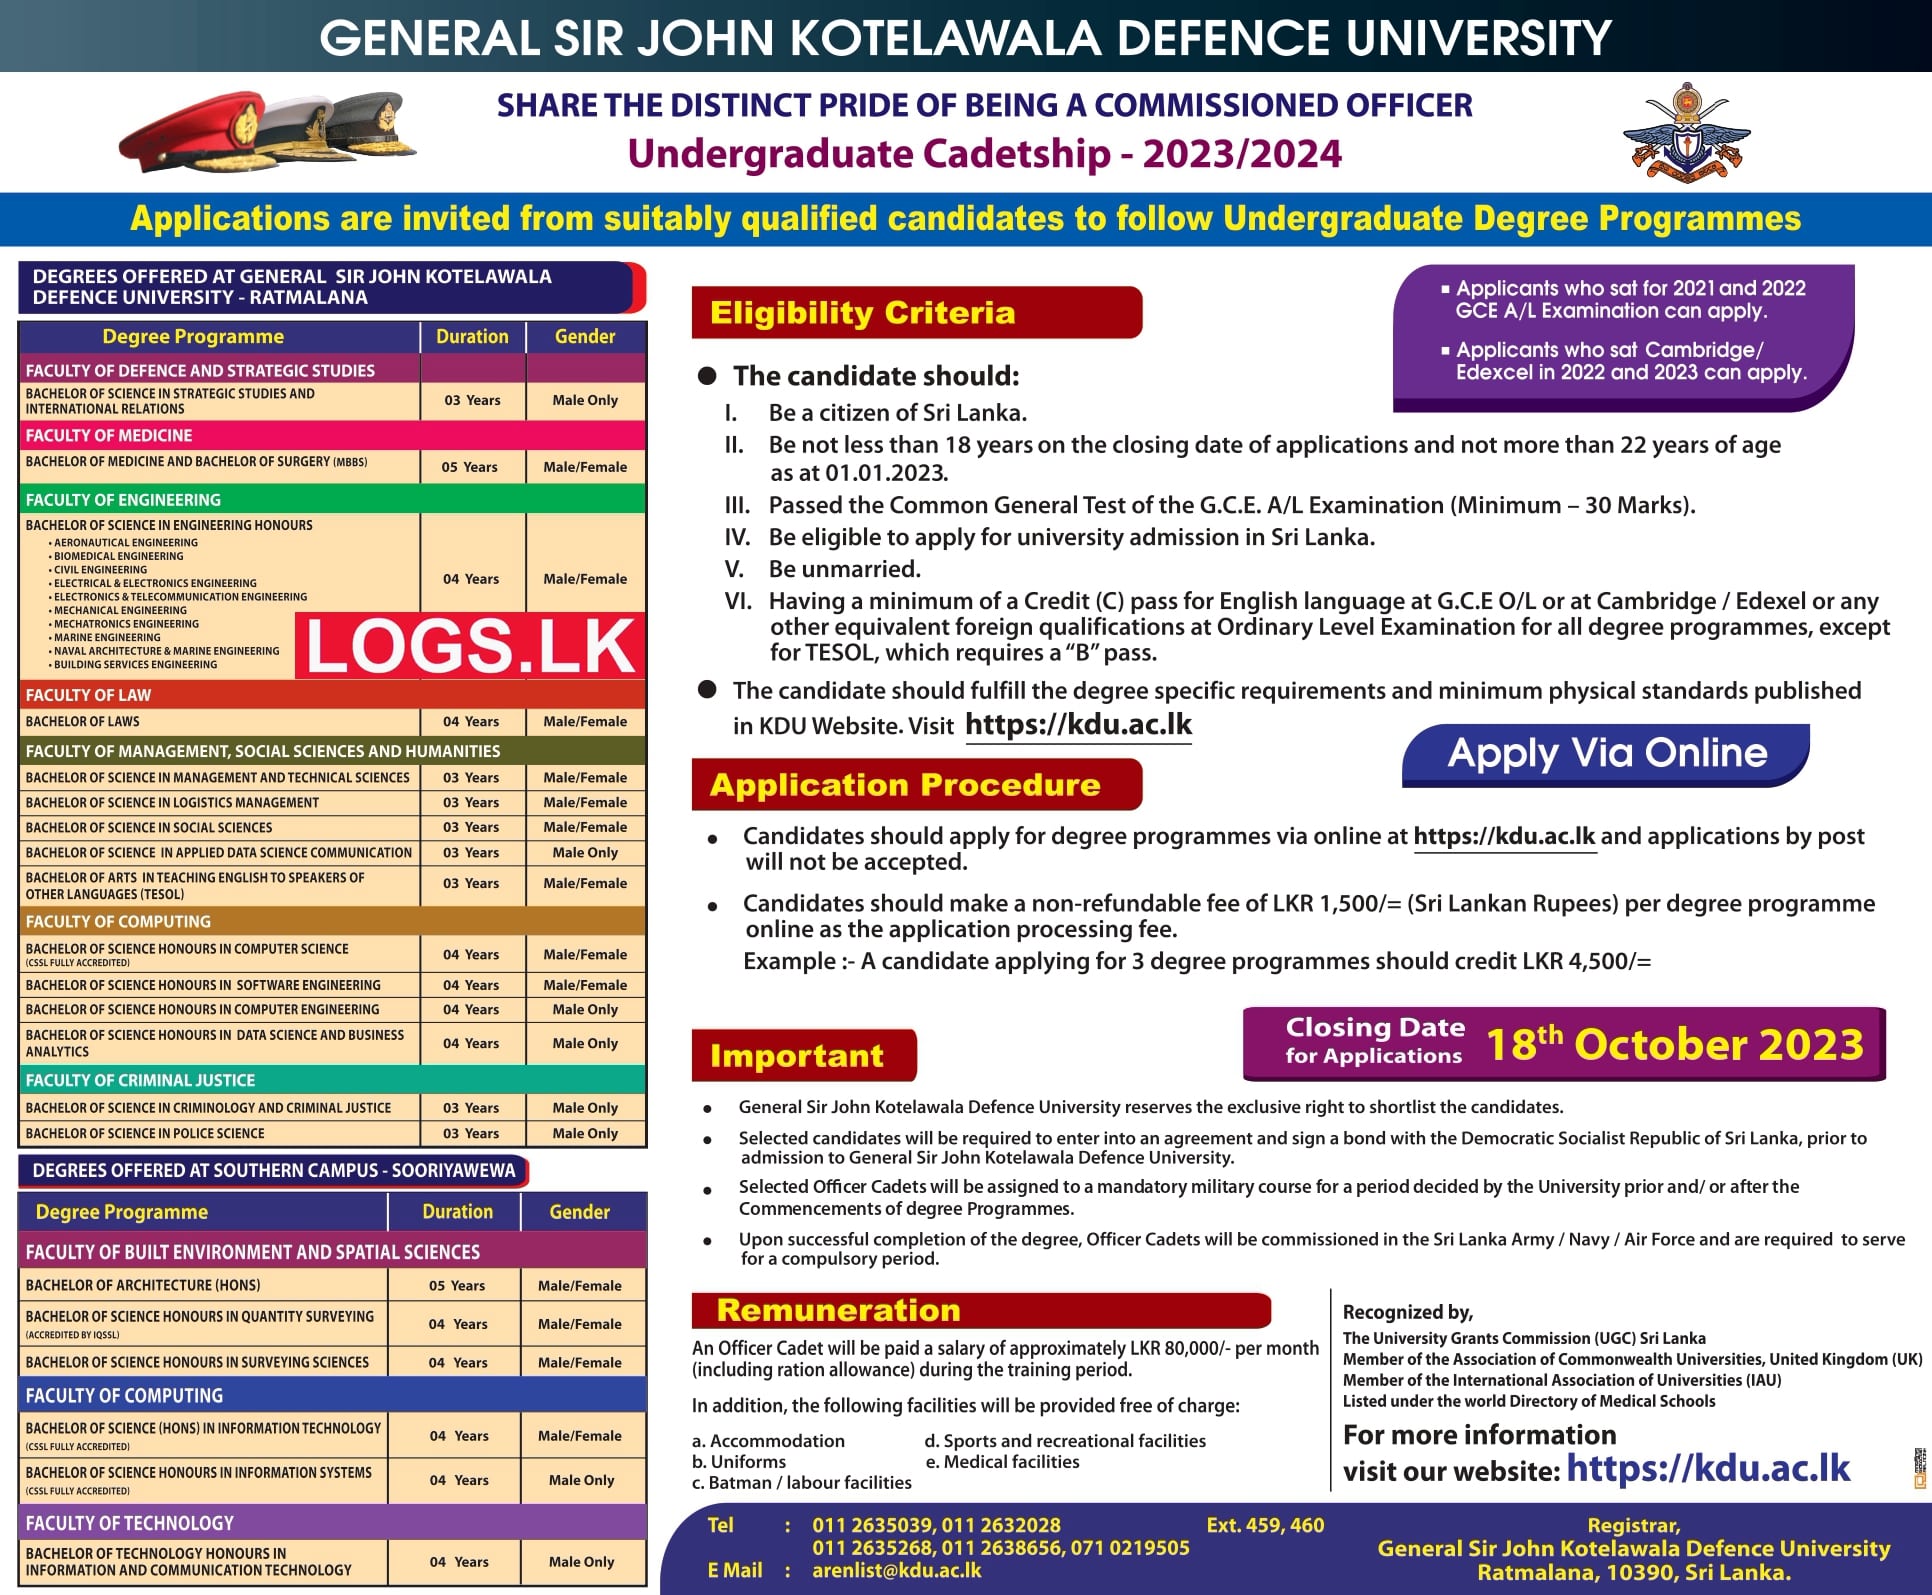 Calling Application for Undergraduate Cadetship 2023/2024 (Full Time) 2nd Batch (Re-opening) - General Sir John Kotelawala Defence University Courses